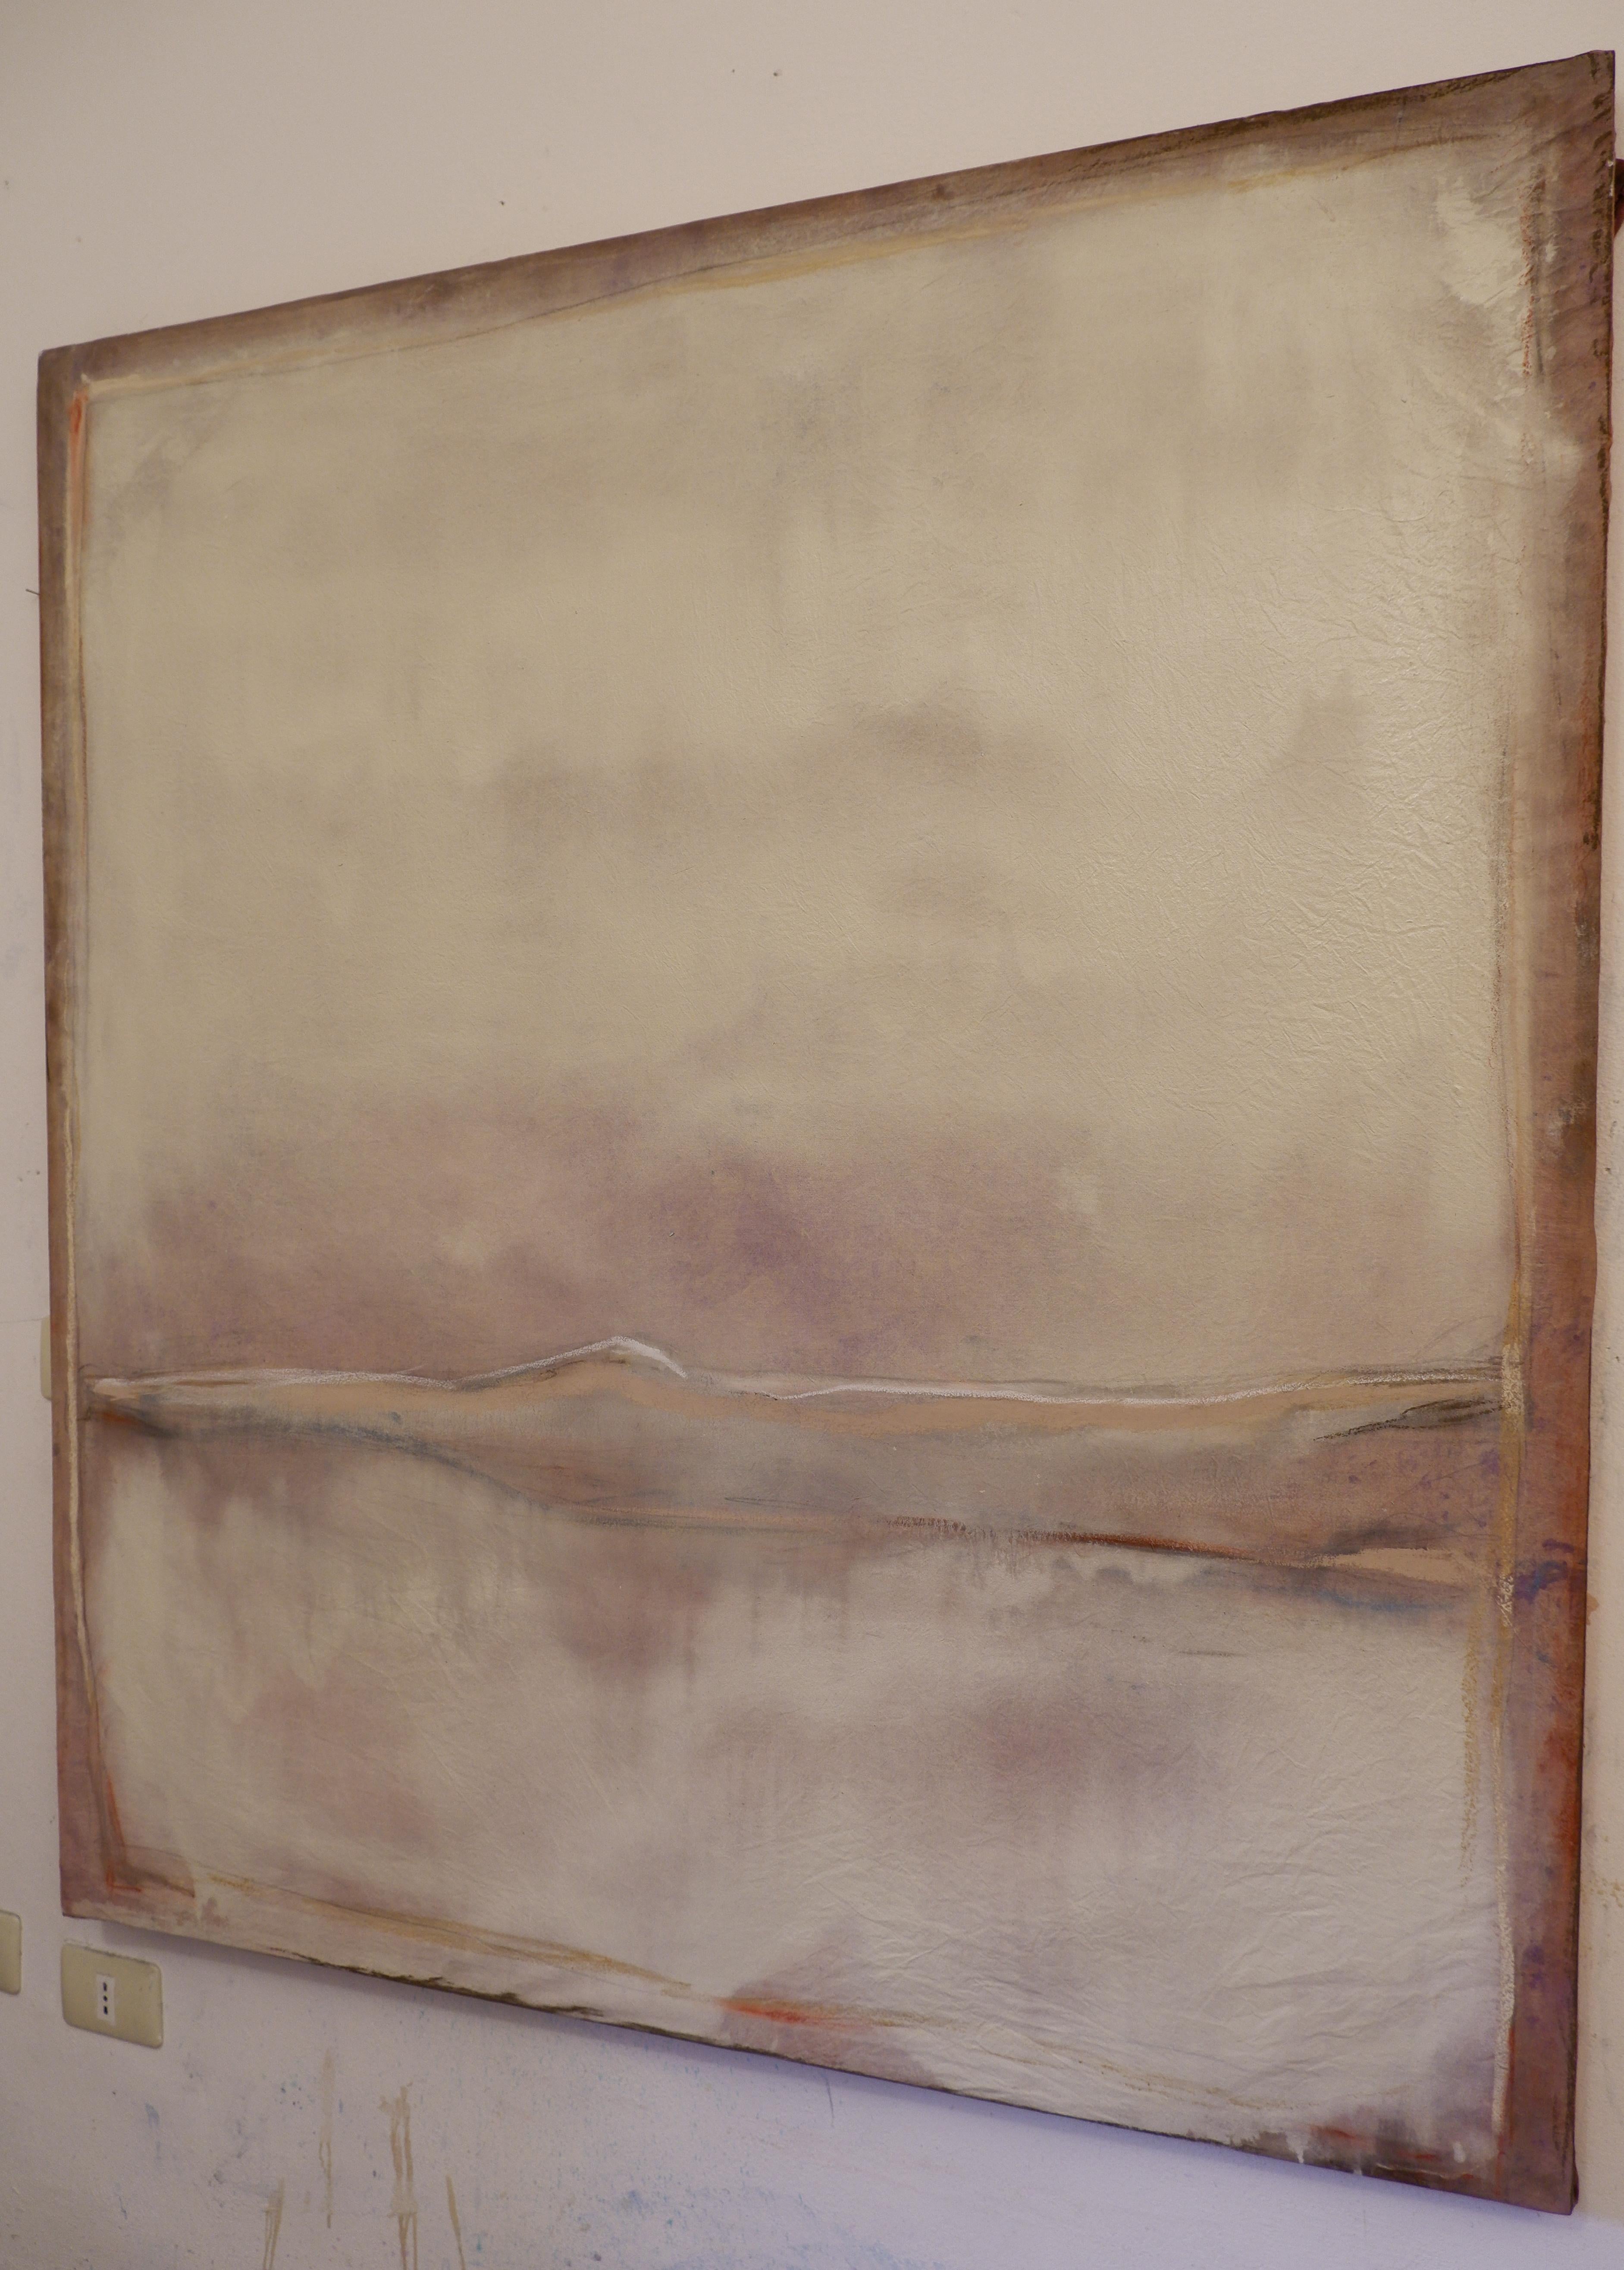 'Landscape 92' is an original minimalist abstract art on canvas by emerging Sicilian artist - Marilina Marchica. It is a natural looking mixed media painting on canvas. The subject is focused on Italian nature, mountain terrain, sea views, decaying